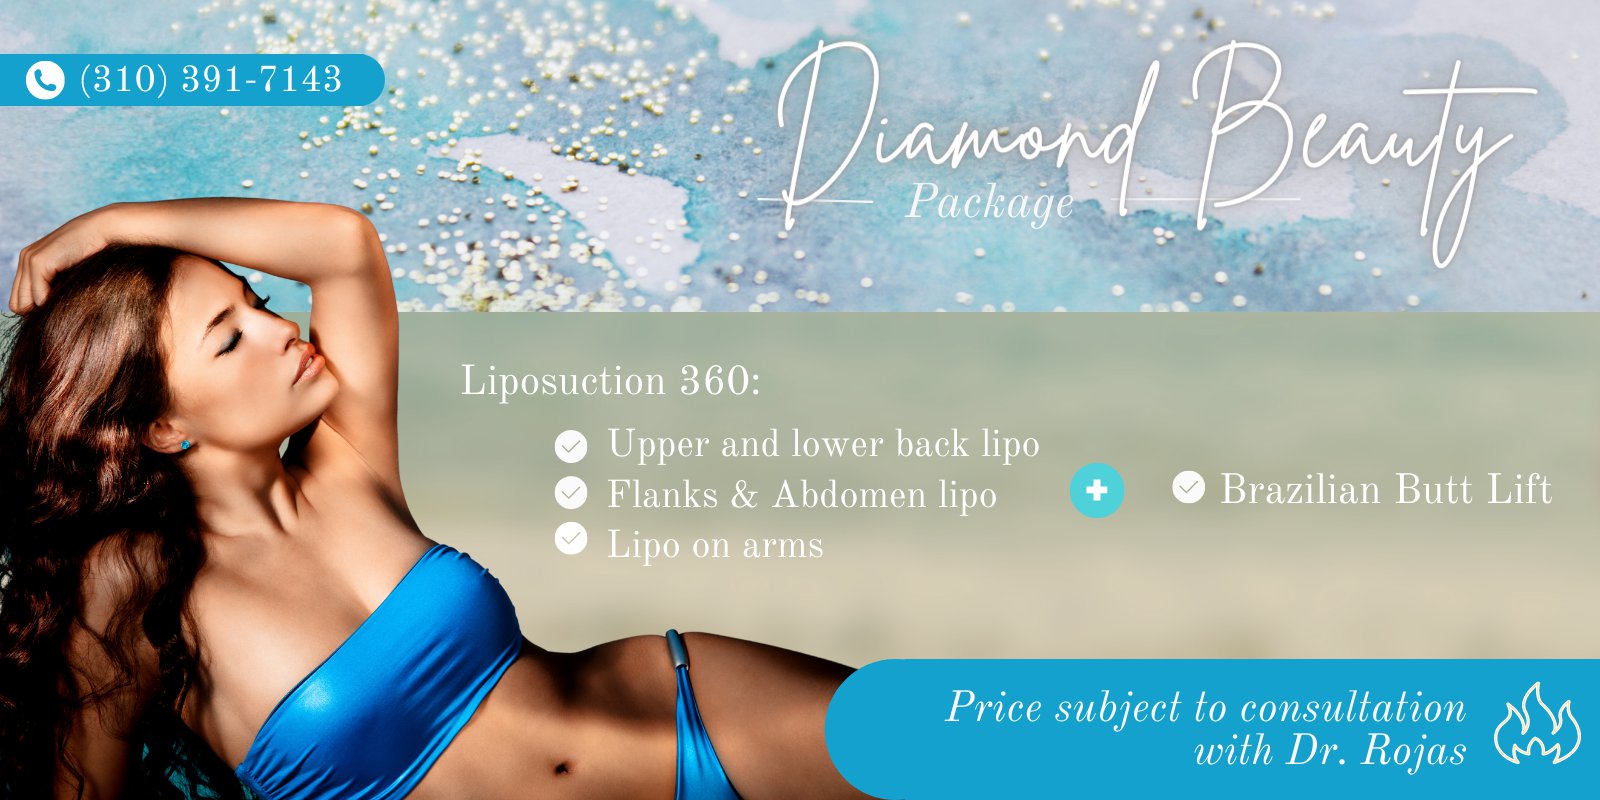 Diamond Beauty Package - Dr Rojas Cosmetic Surgery